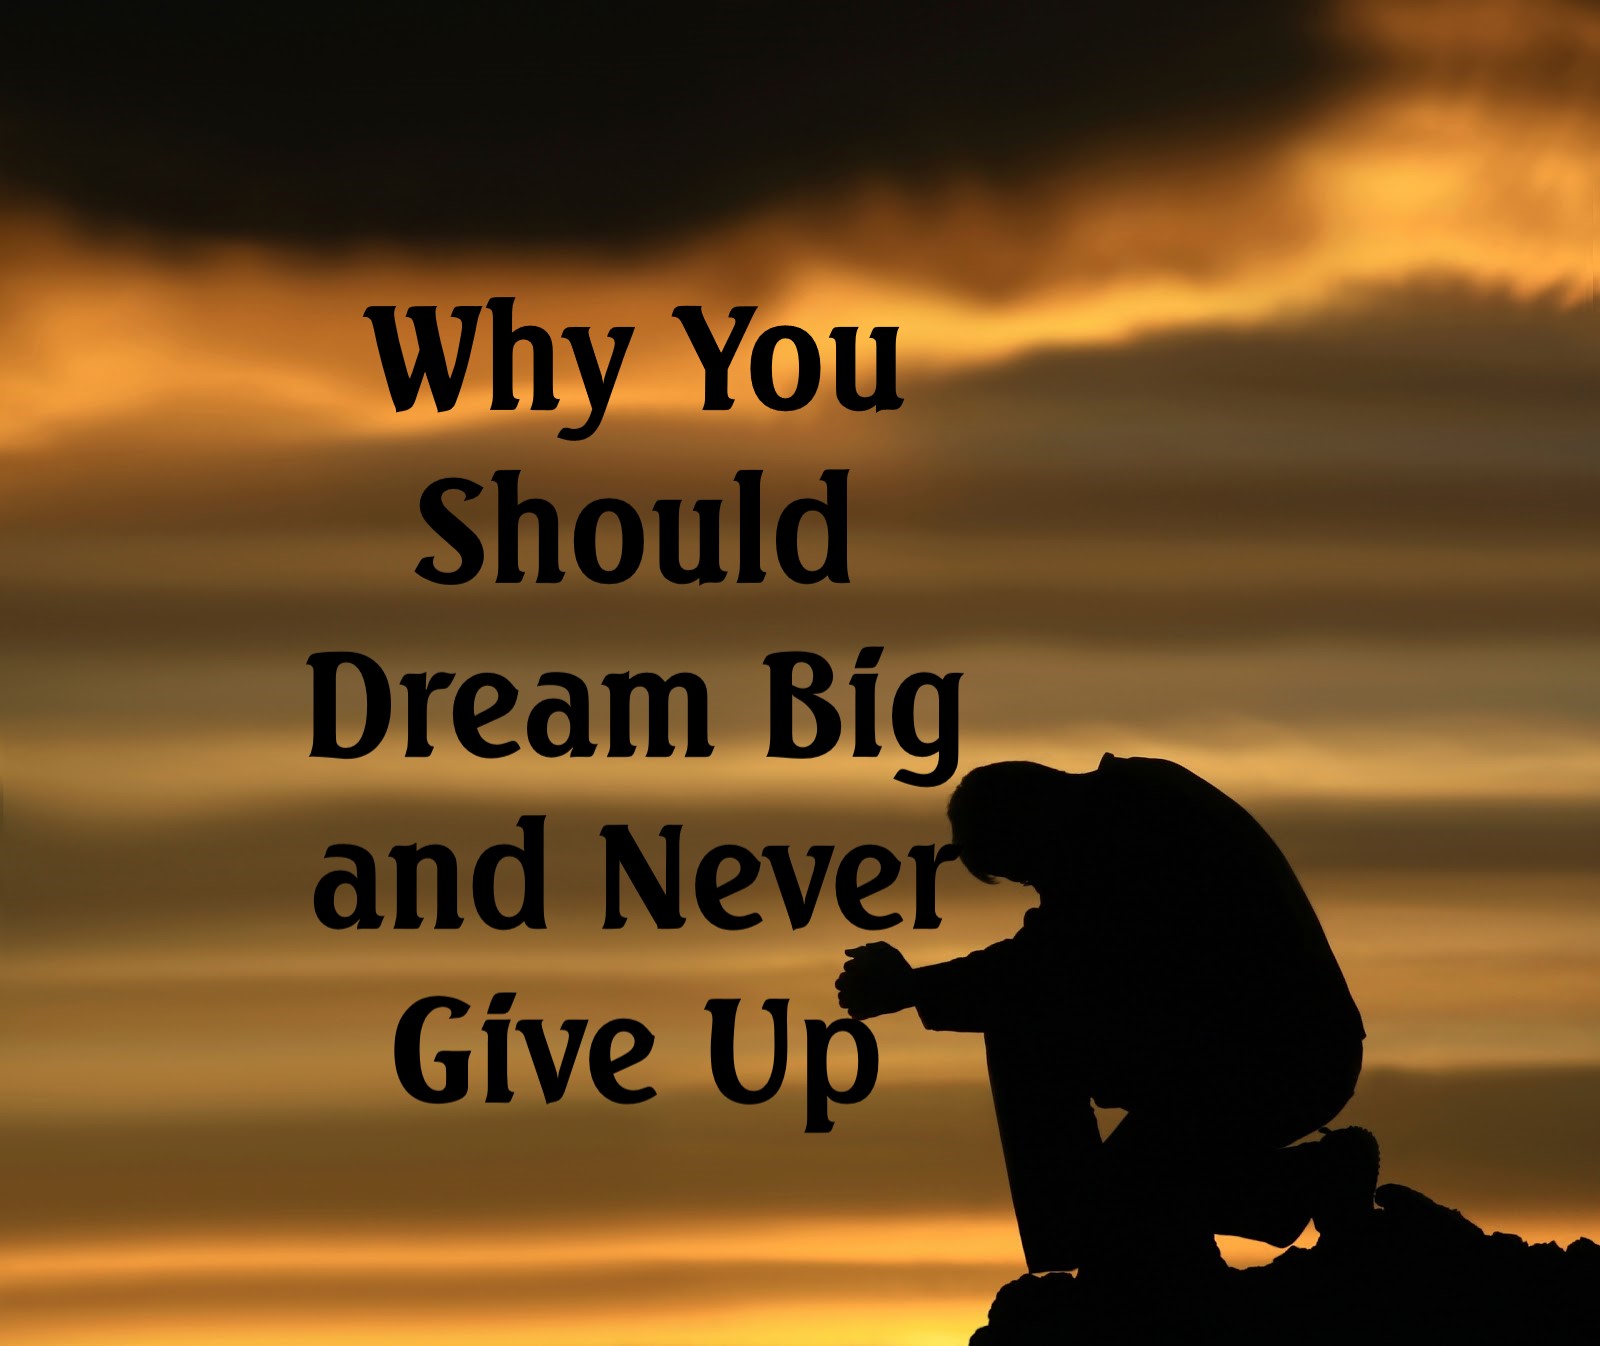 Why You Should Dream Big and Never Give Up